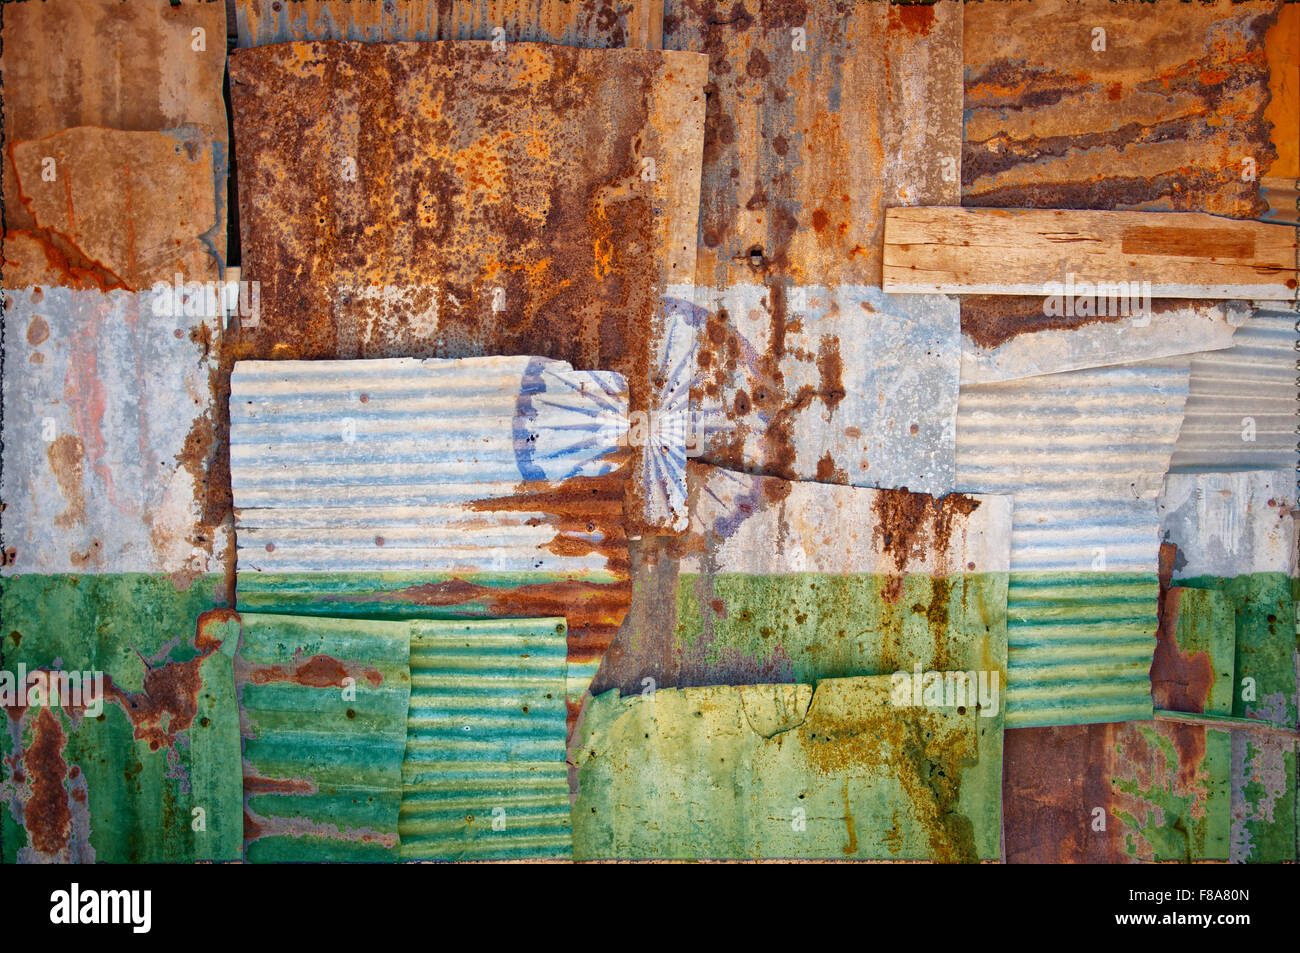 An abstract background image of the flag of India painted on to rusty corrugated iron sheets overlapping to form a wall or fence Stock Photo